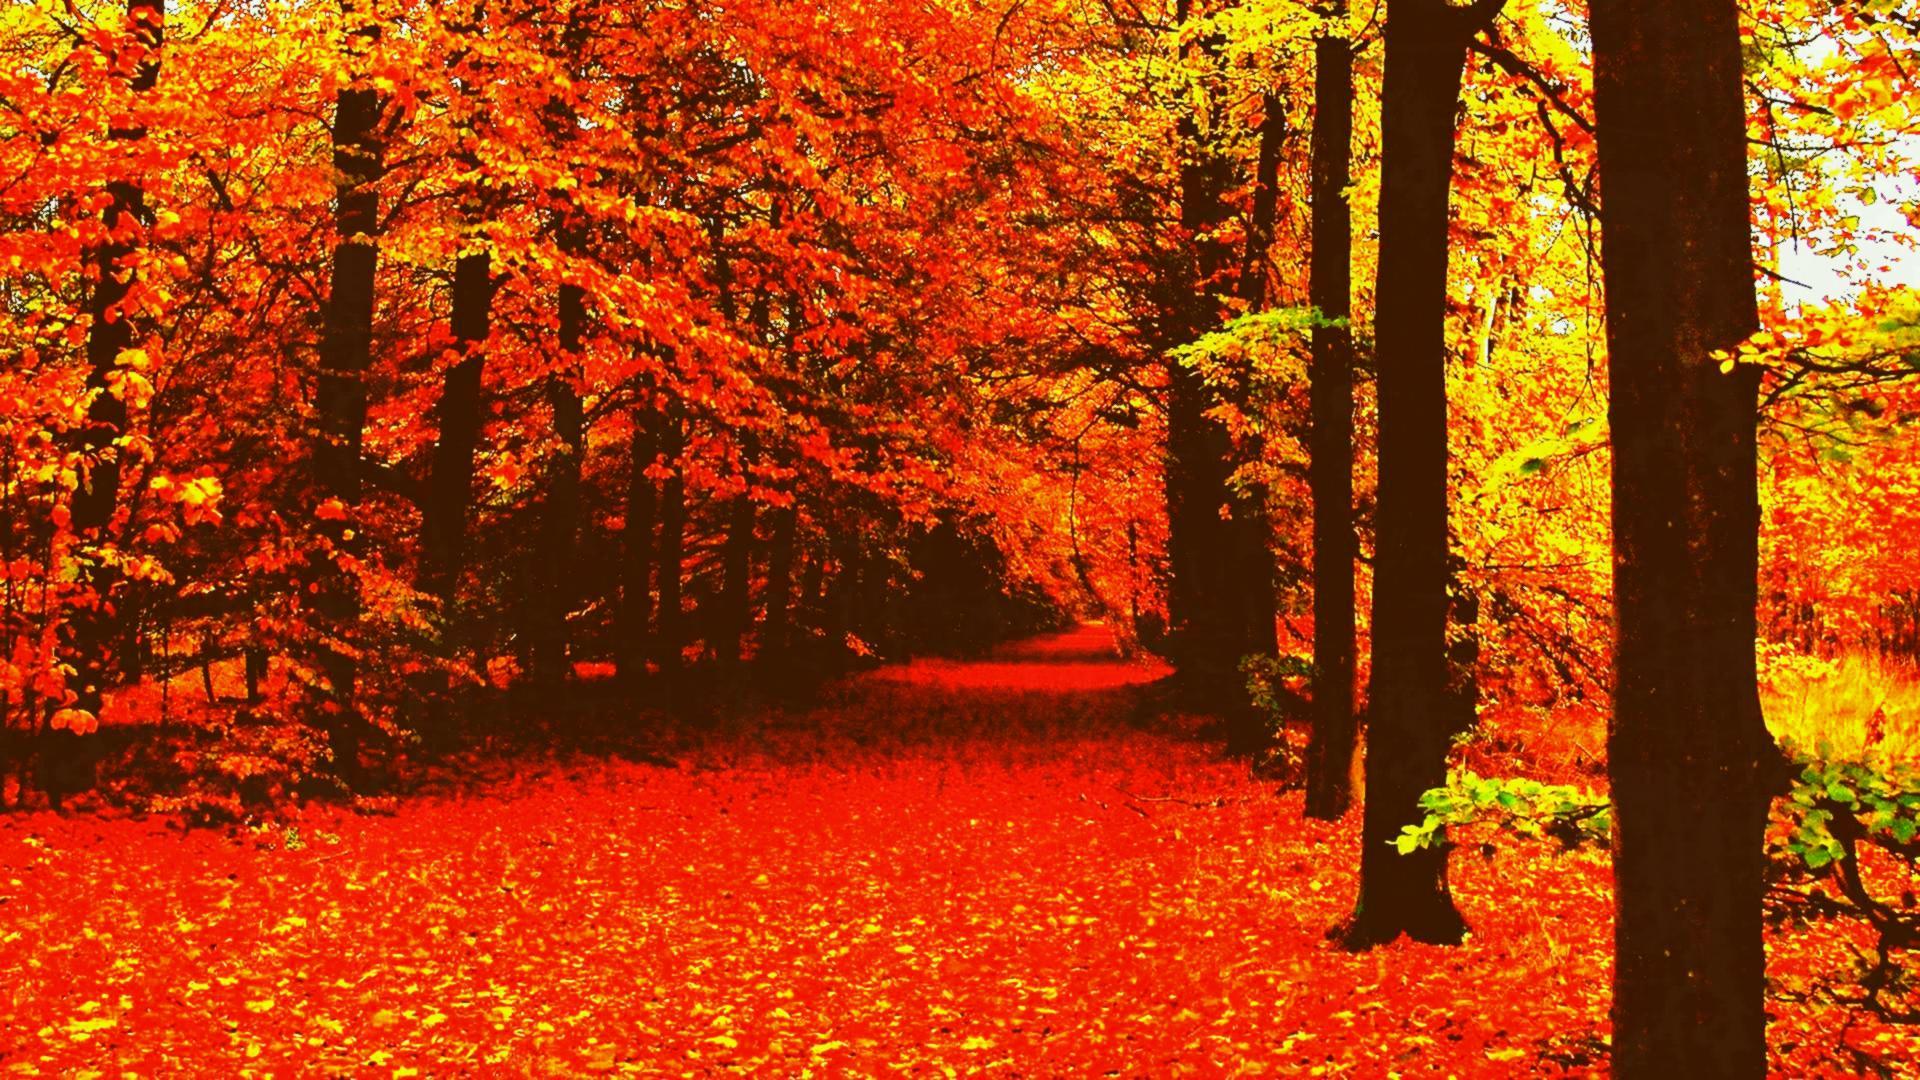 Autumn Aesthetic Laptop Wallpapers - Top Free Autumn Aesthetic Laptop ...